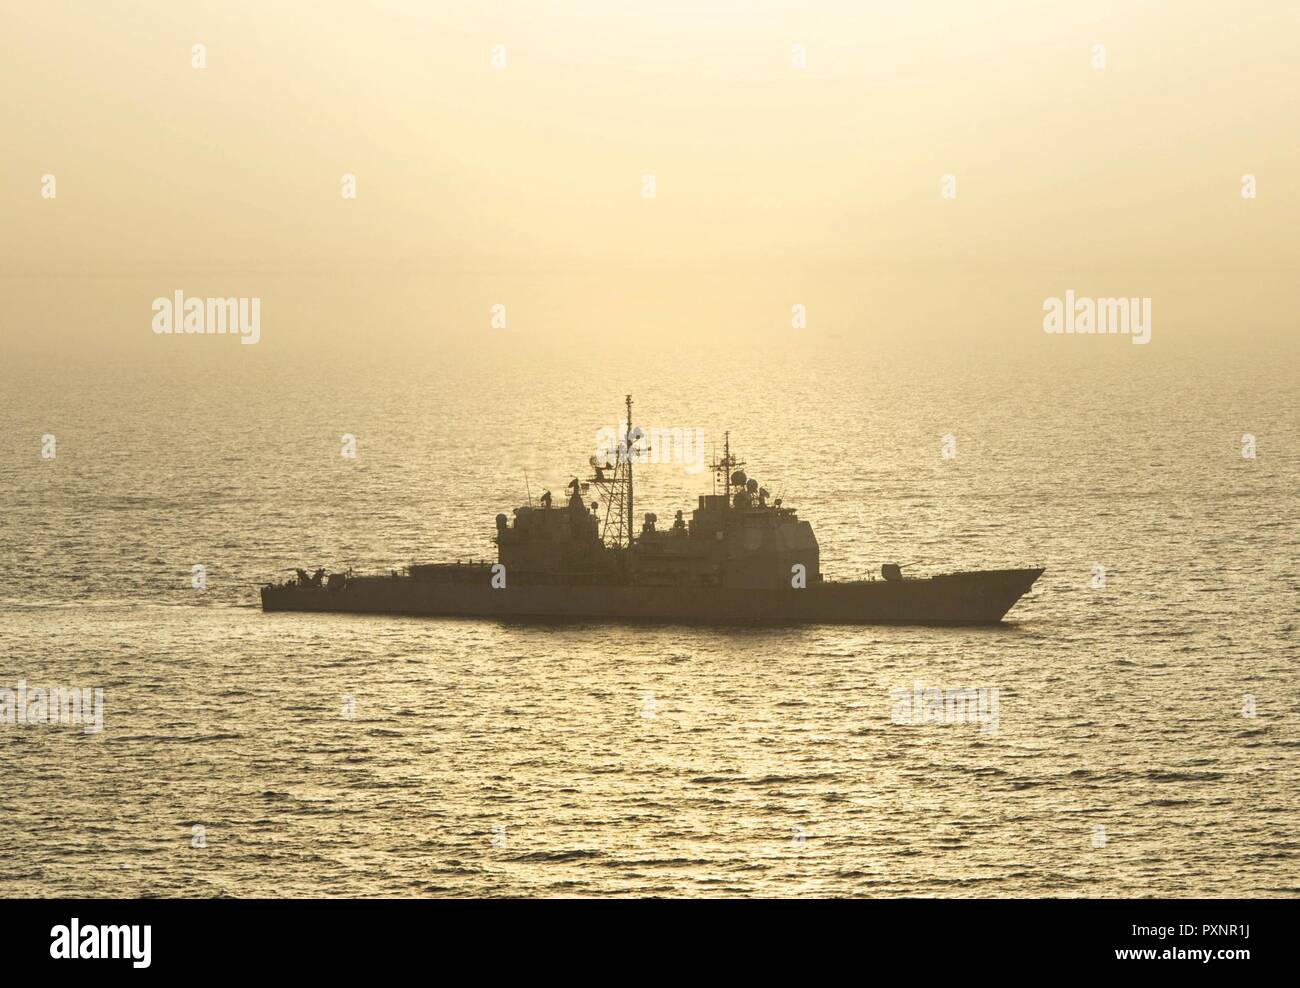 ARABIAN GULF (June 18, 2017) The guided-missile cruiser USS Vella Gulf (CG 72) steams through the Arabian Gulf during Exercise Spartan Kopis 17, June 18.  Exercise Spartan Kopis is a Task Force (TF) 55-led exercise between the U.S. Navy and U.S. Coast Guard in order to increase tactical proficiency, broaden levels of cooperation, enhance mutual capability and support long-term security and stability in the region. Vella Gulf is deployed to the U.S. 5th Fleet area of operations to reassure allies and partners, and preserve the freedom of navigation and the free flow of commerce in the region. Stock Photo